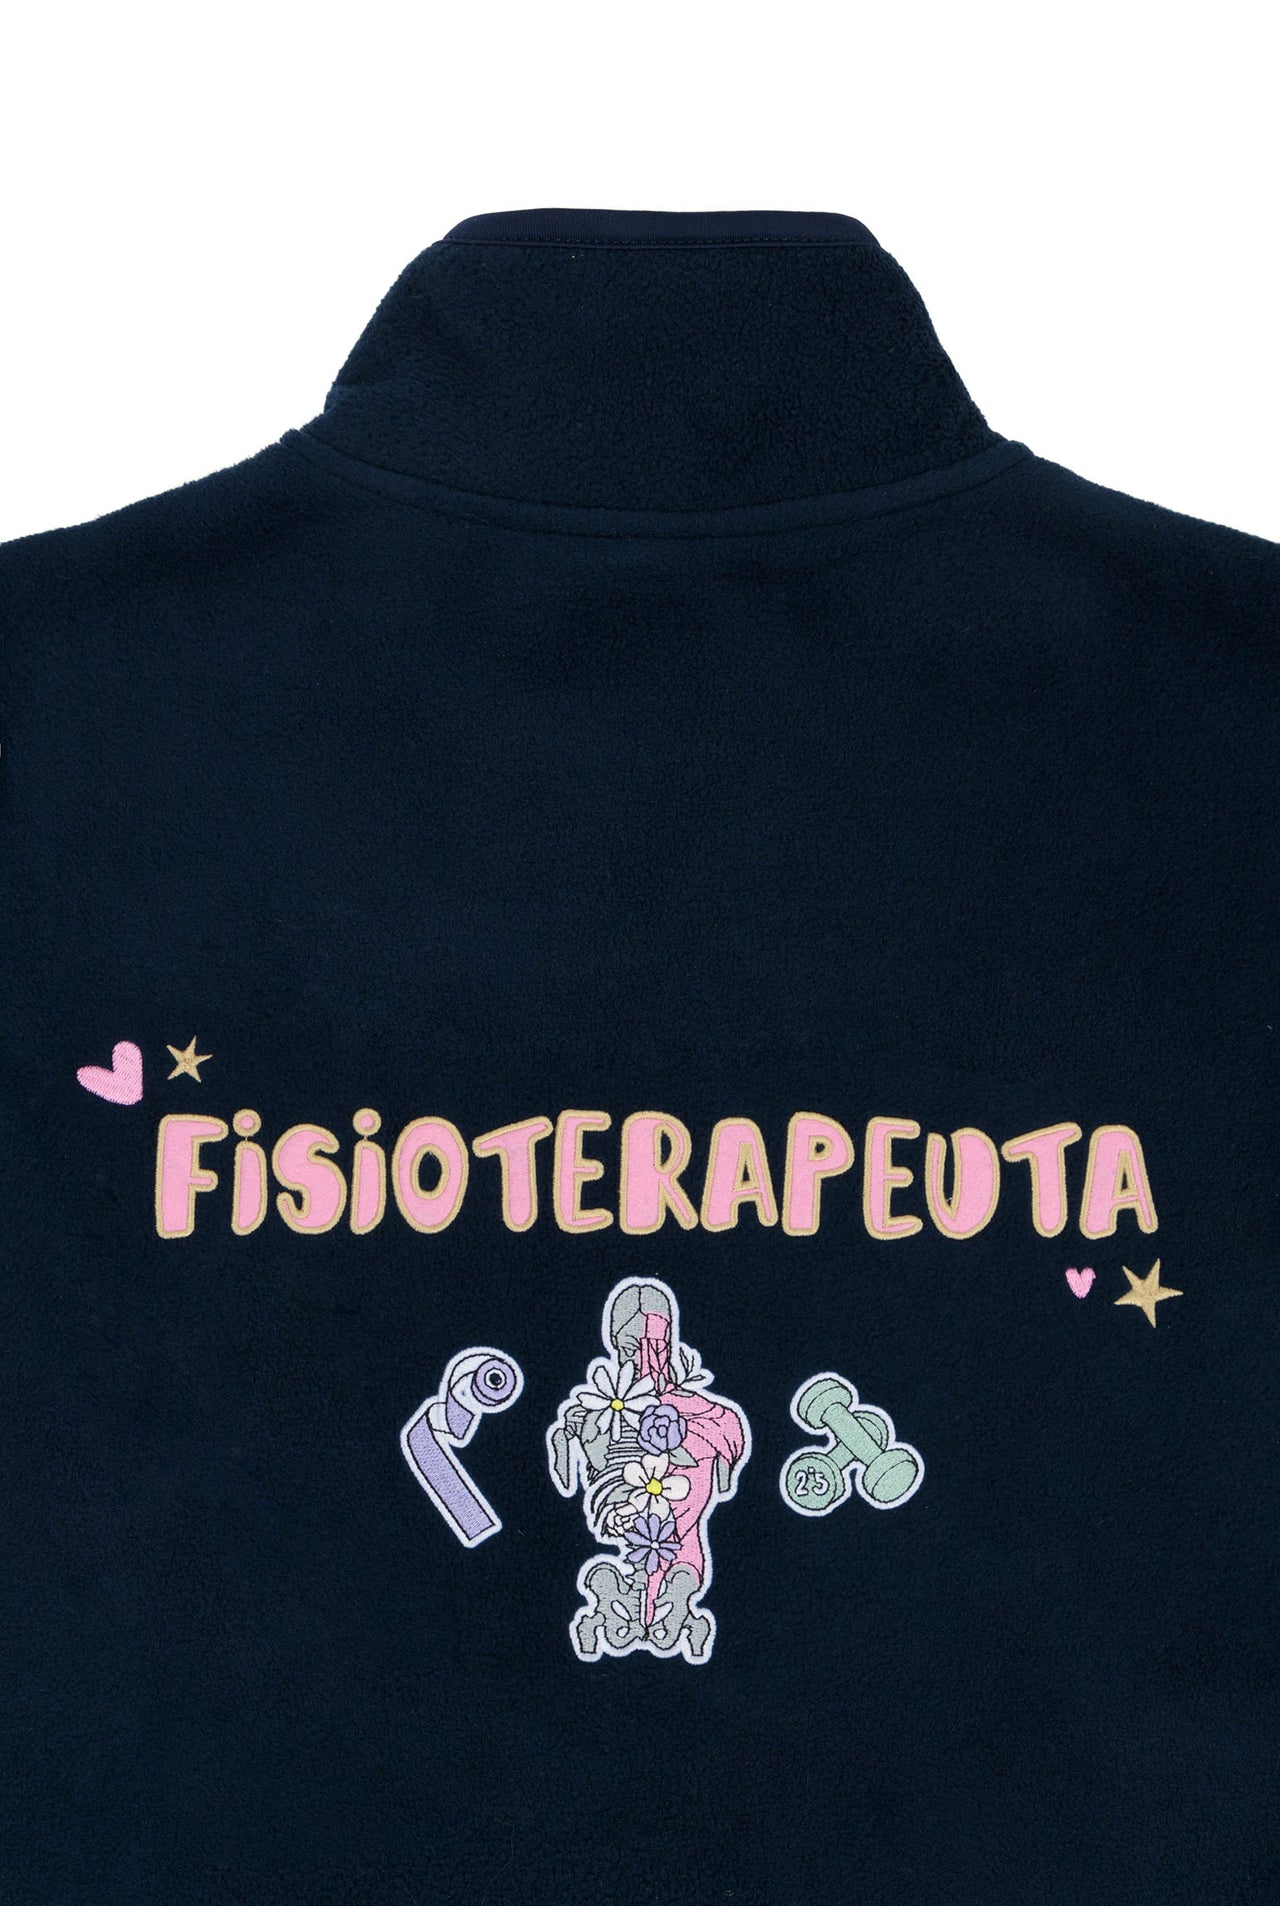 FLEECE JACKET "FISIOTERAPEUTA" - A/W23 (PREORDER, SHIPPING STARTING FROM 16/05/2024)